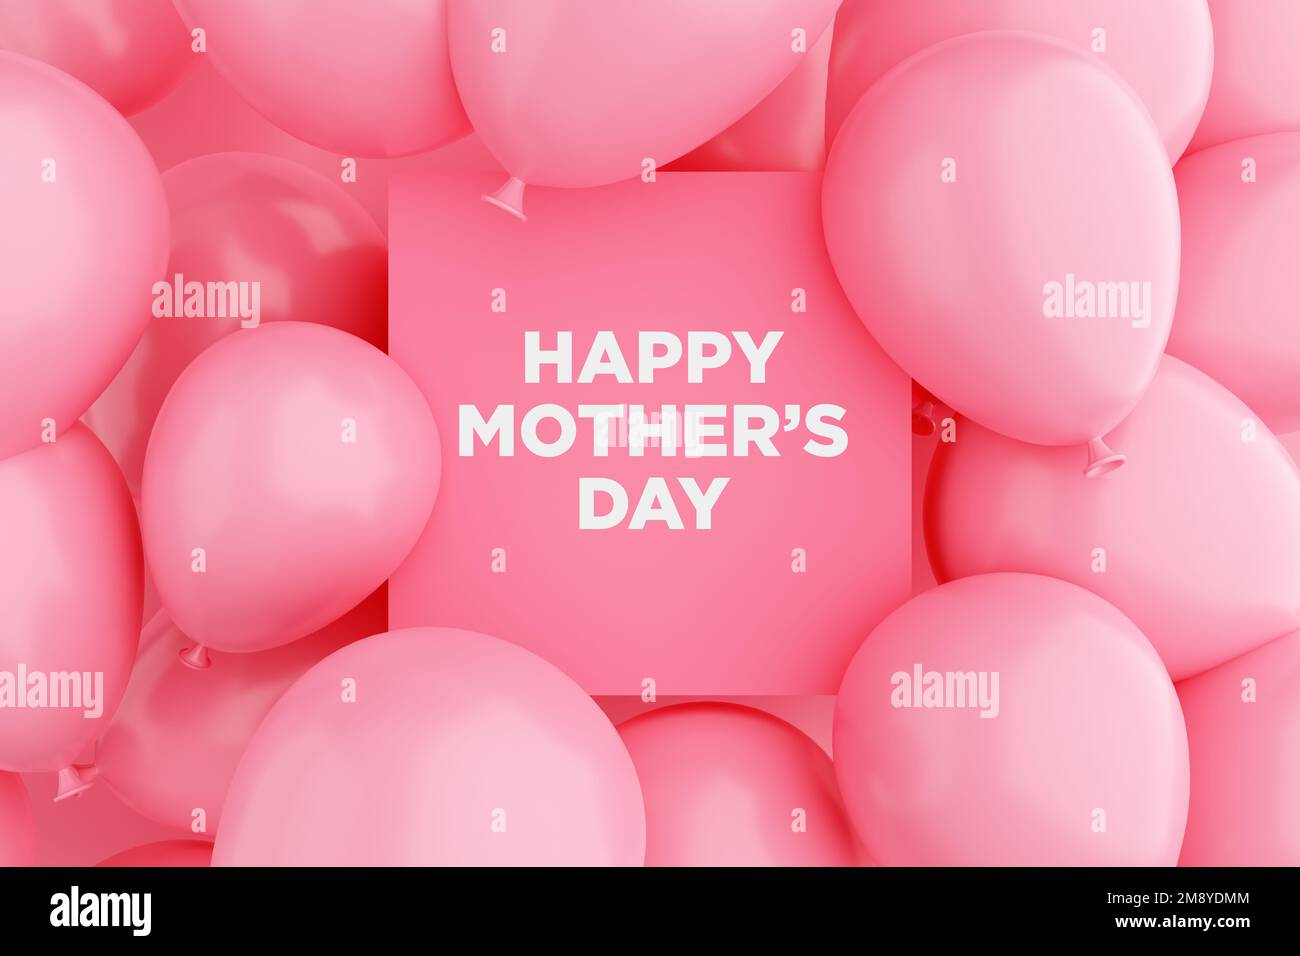 Pink sign frame with the message HAPPY MOTHER'S DAY surrounded with pink air balloons. Happy mothers day greeting celebration concept. 3D rendering. Stock Photo